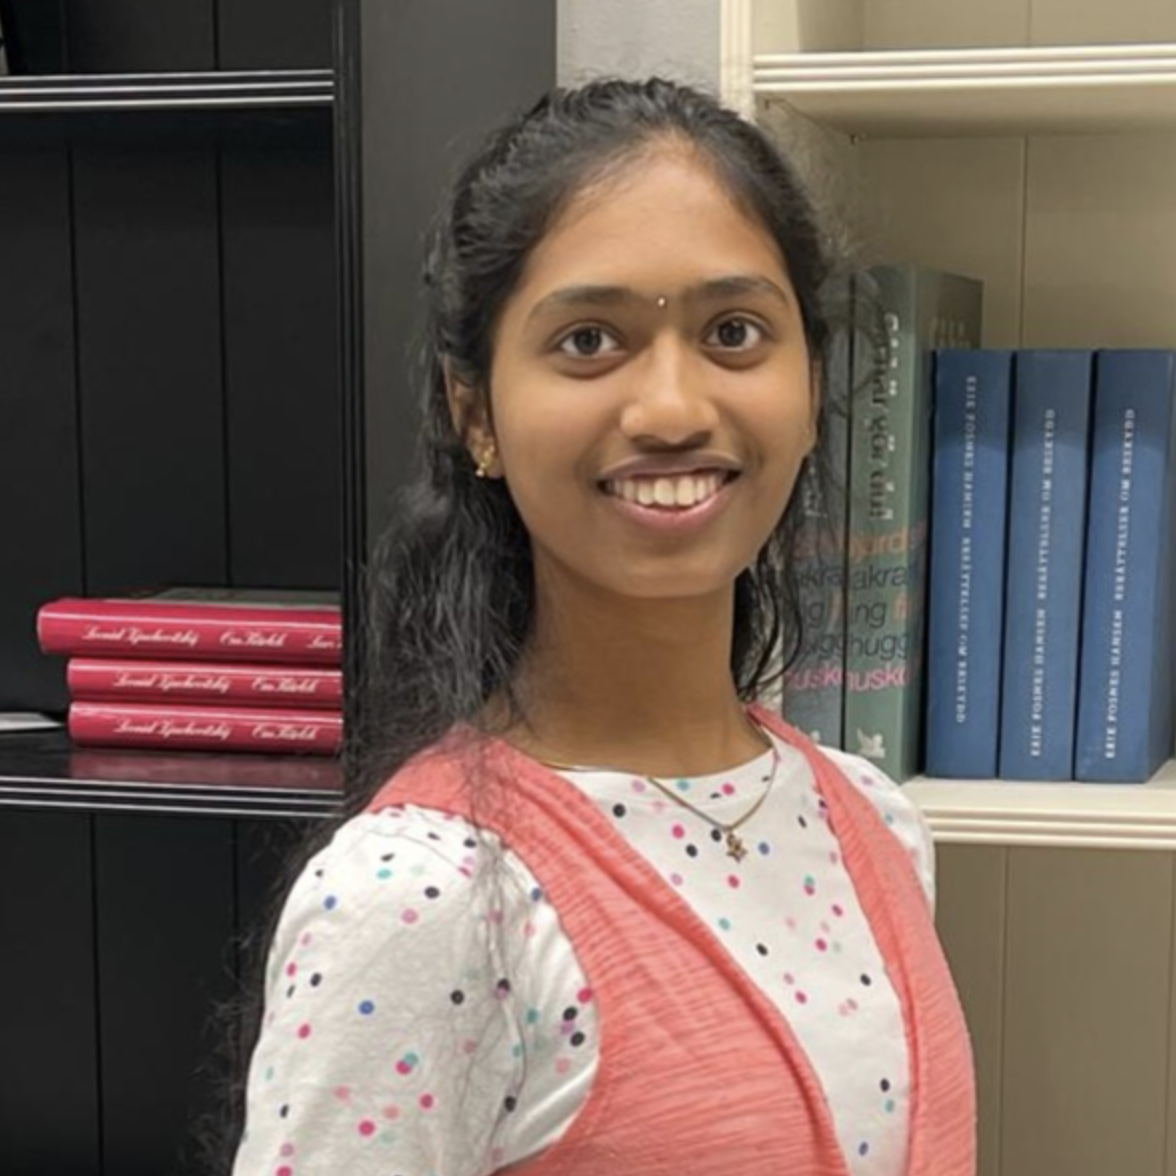 A young person in a polka dot shirt stands near a bookshelf and smiles.